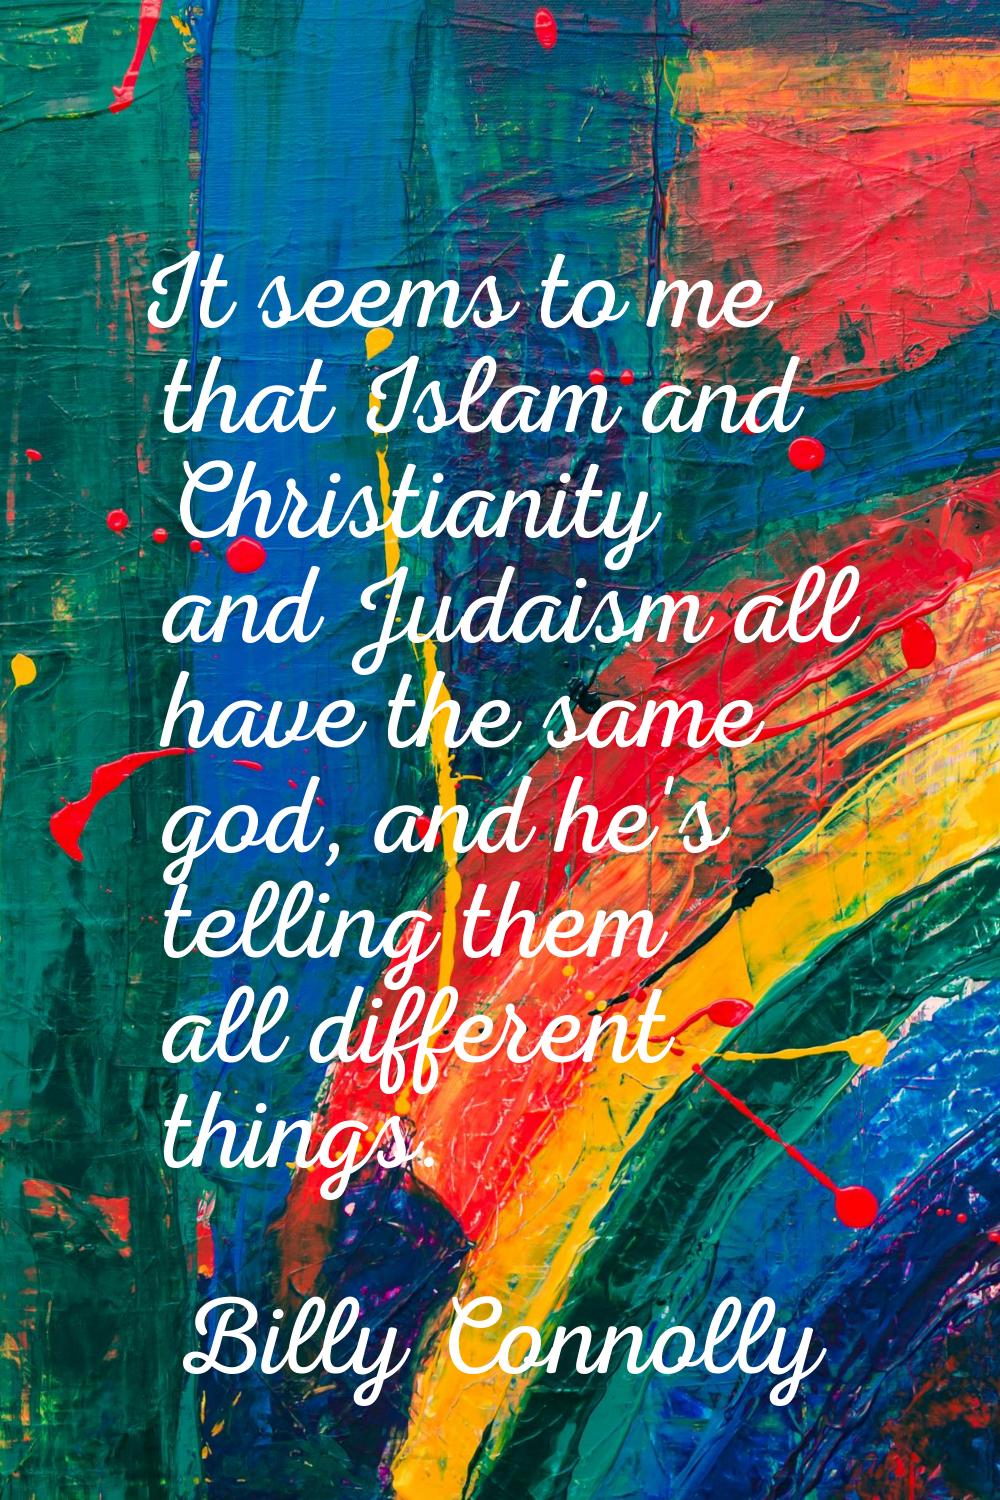 It seems to me that Islam and Christianity and Judaism all have the same god, and he's telling them